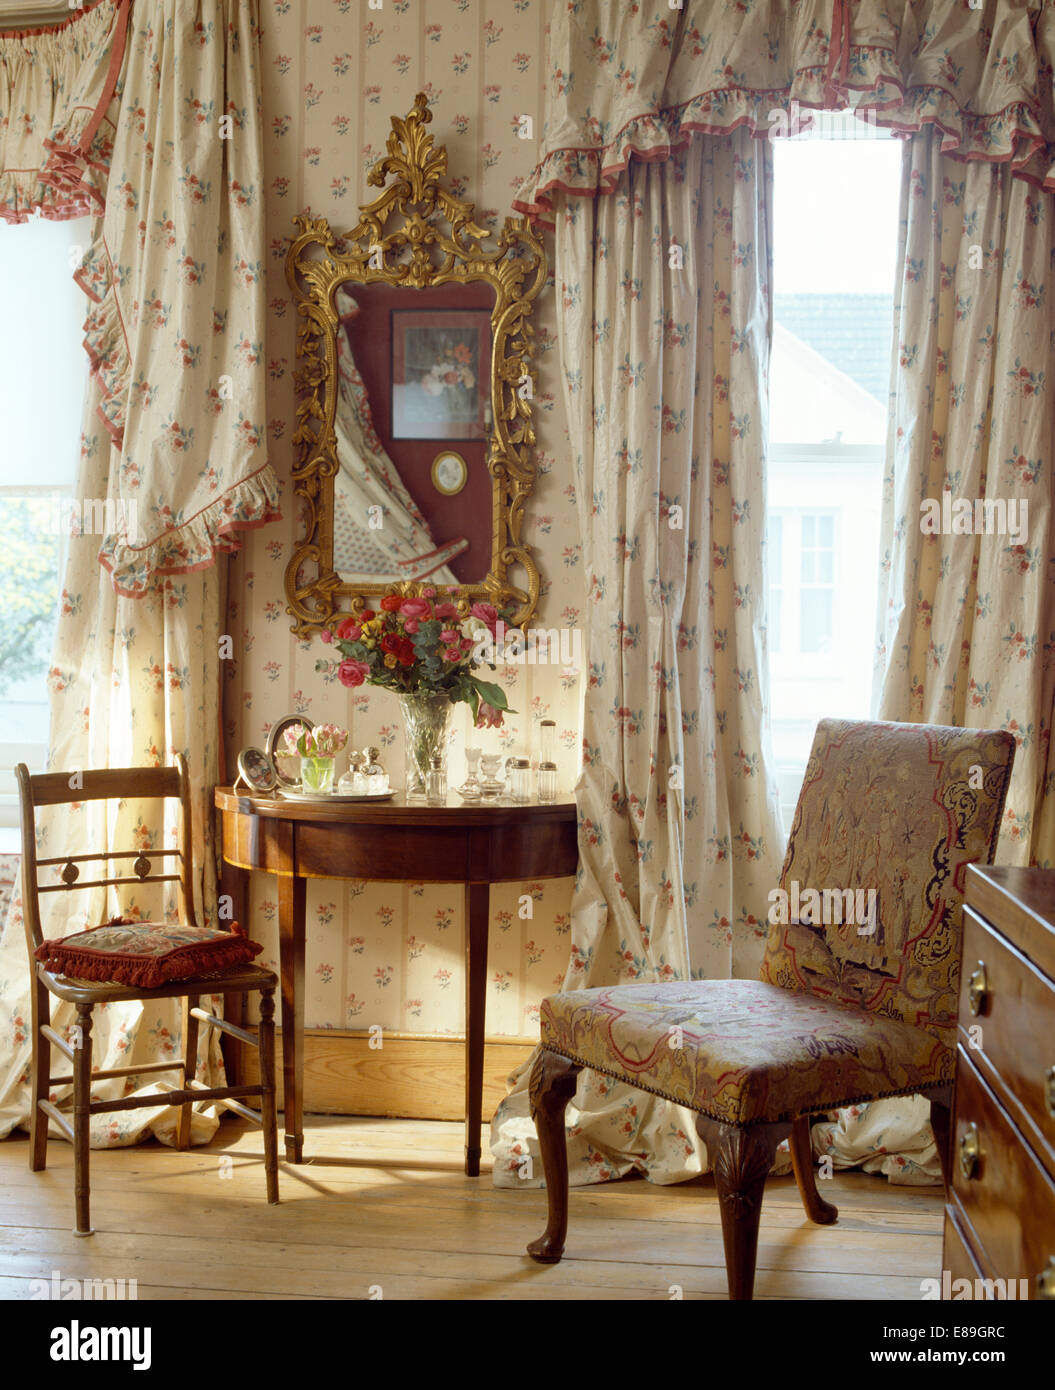 Floral curtains and pelmet on windows in bedroom with antique gilt mirror above antique console table Stock Photo